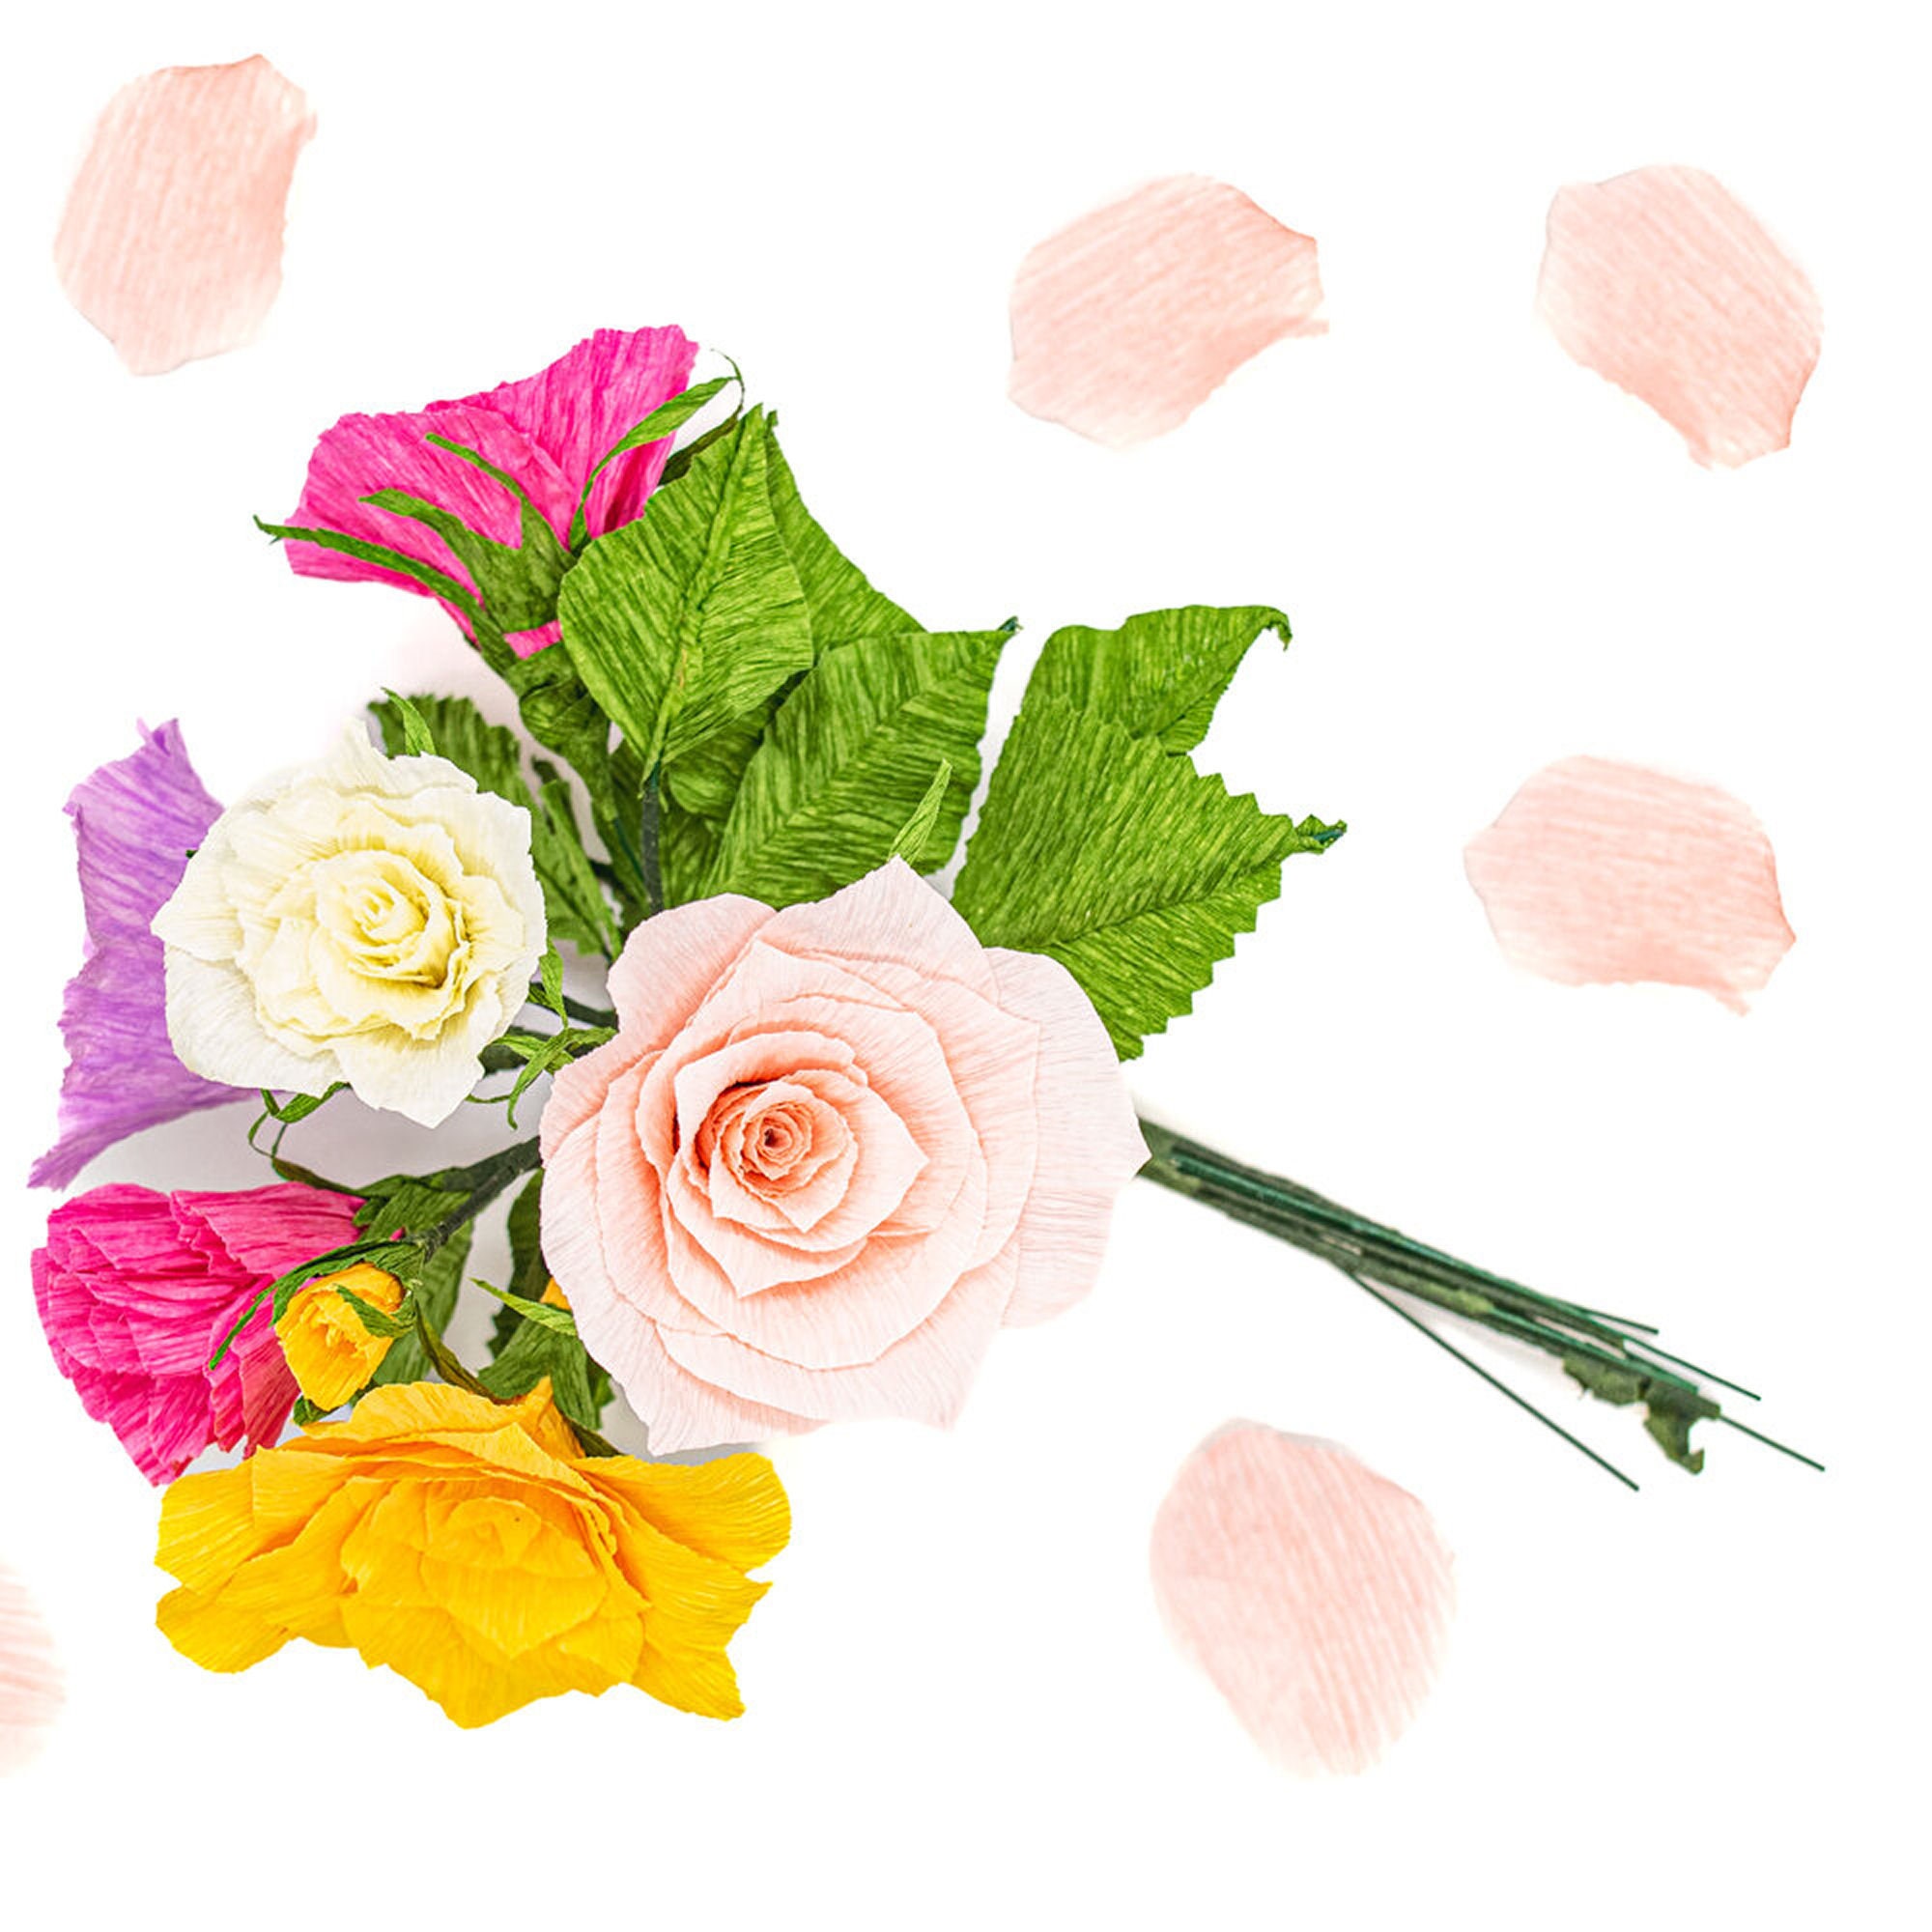 Crepe Paper Flowers Craft Kit | By The Danes